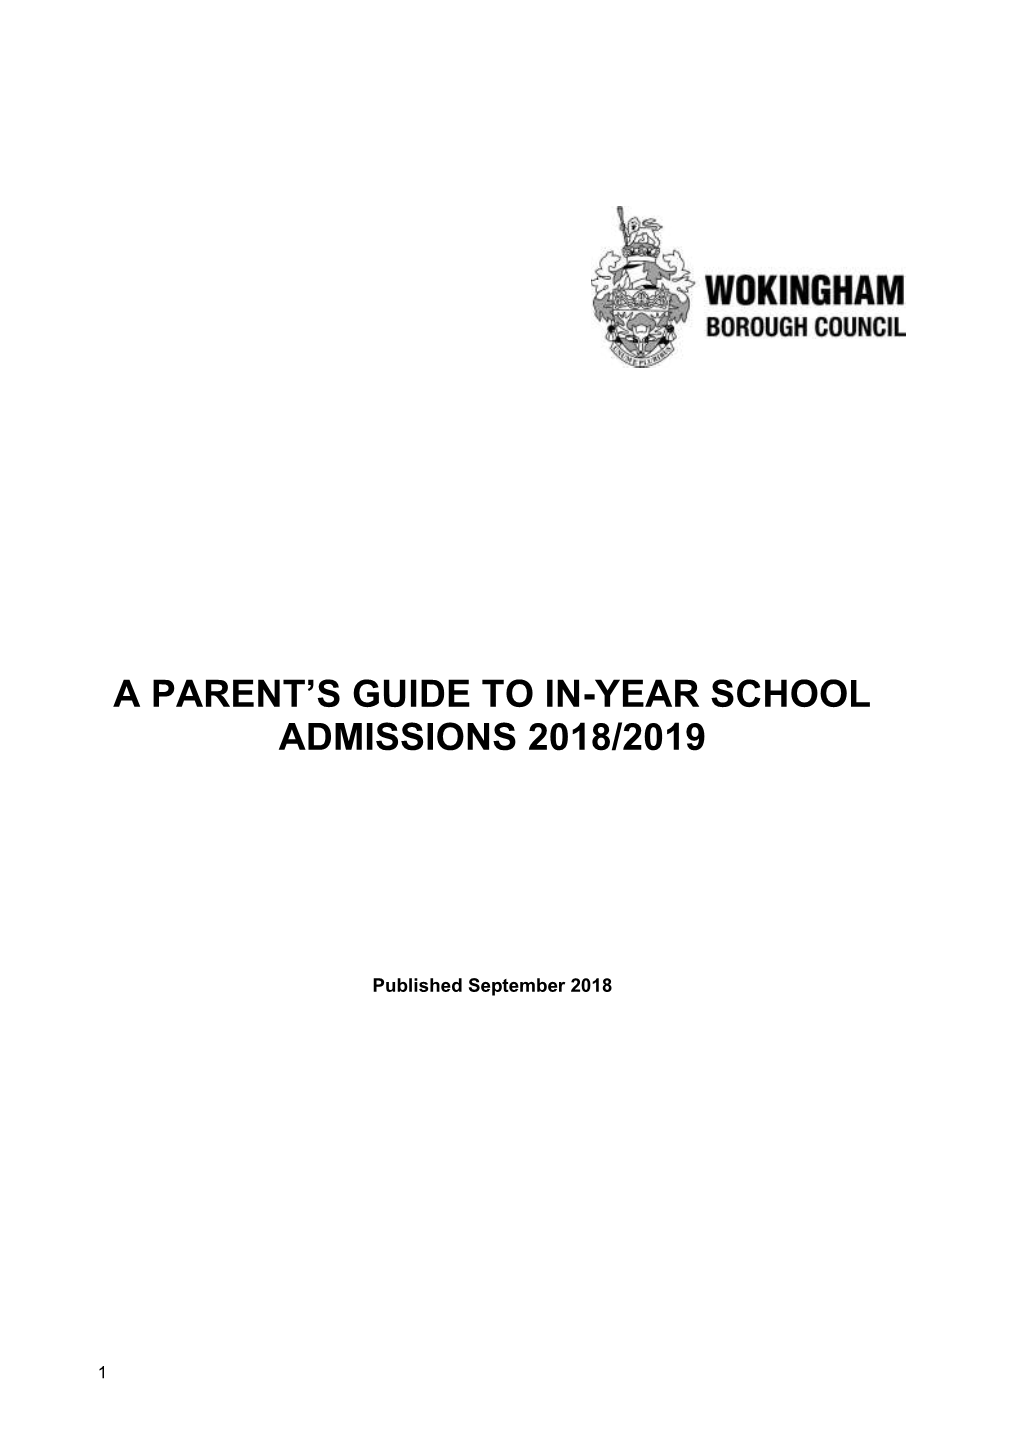 A Parent's Guide to In-Year School Admissions 2018/2019